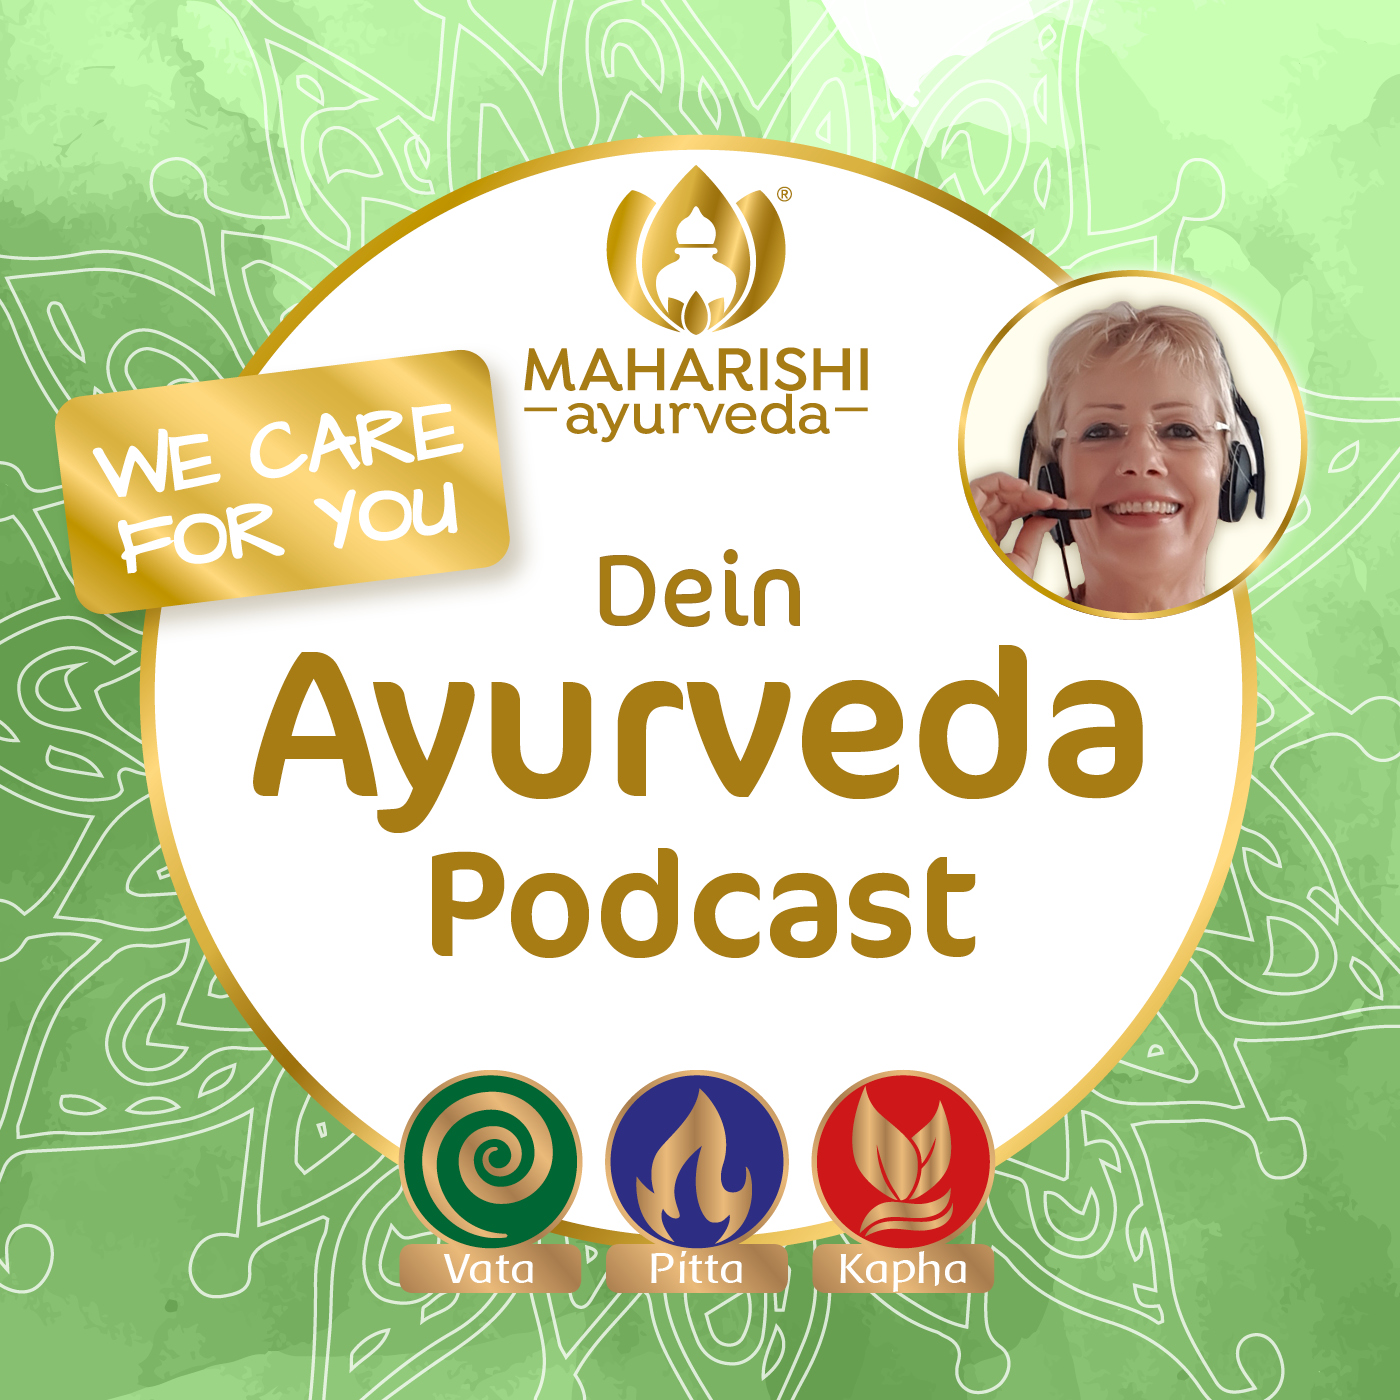 We care for you – Dein Ayurveda-Podcast 